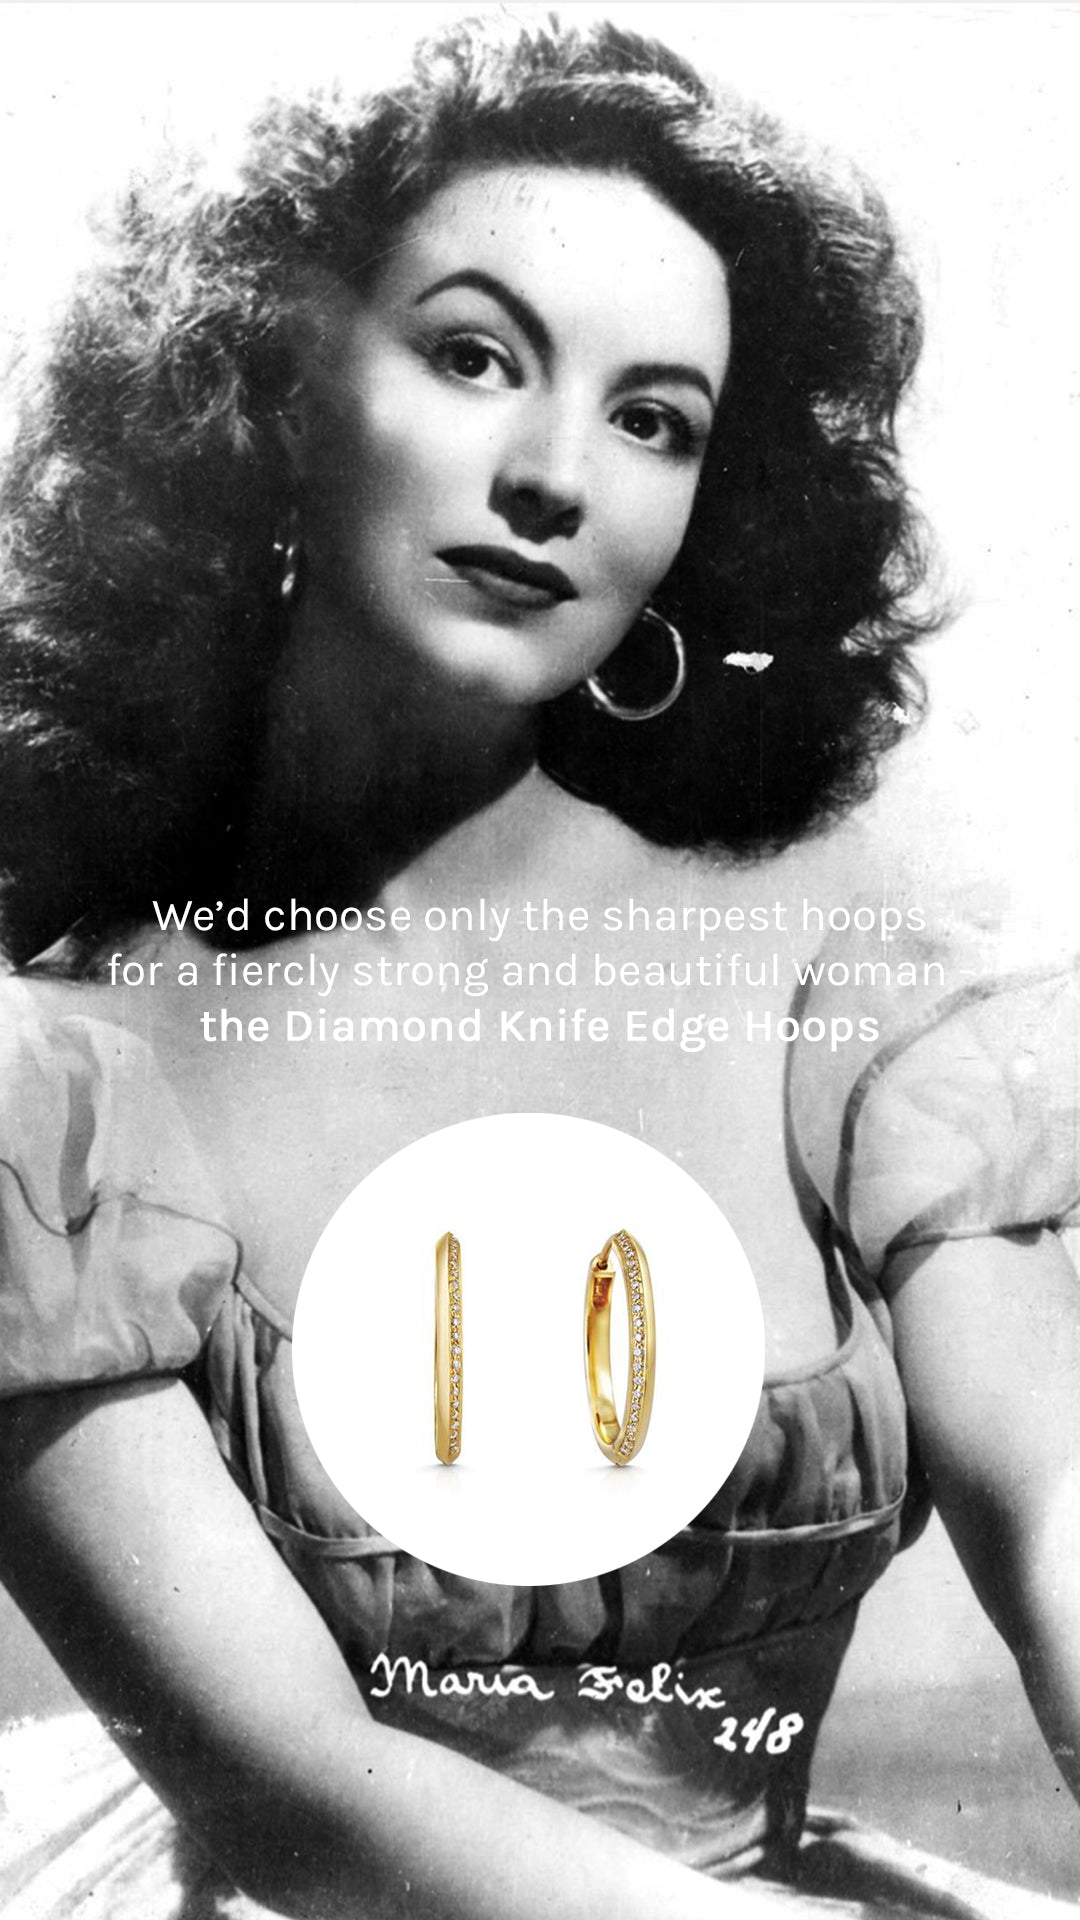 Maria Félix and the Diamond Knife Edge Hoops we'd wear to suit her style.